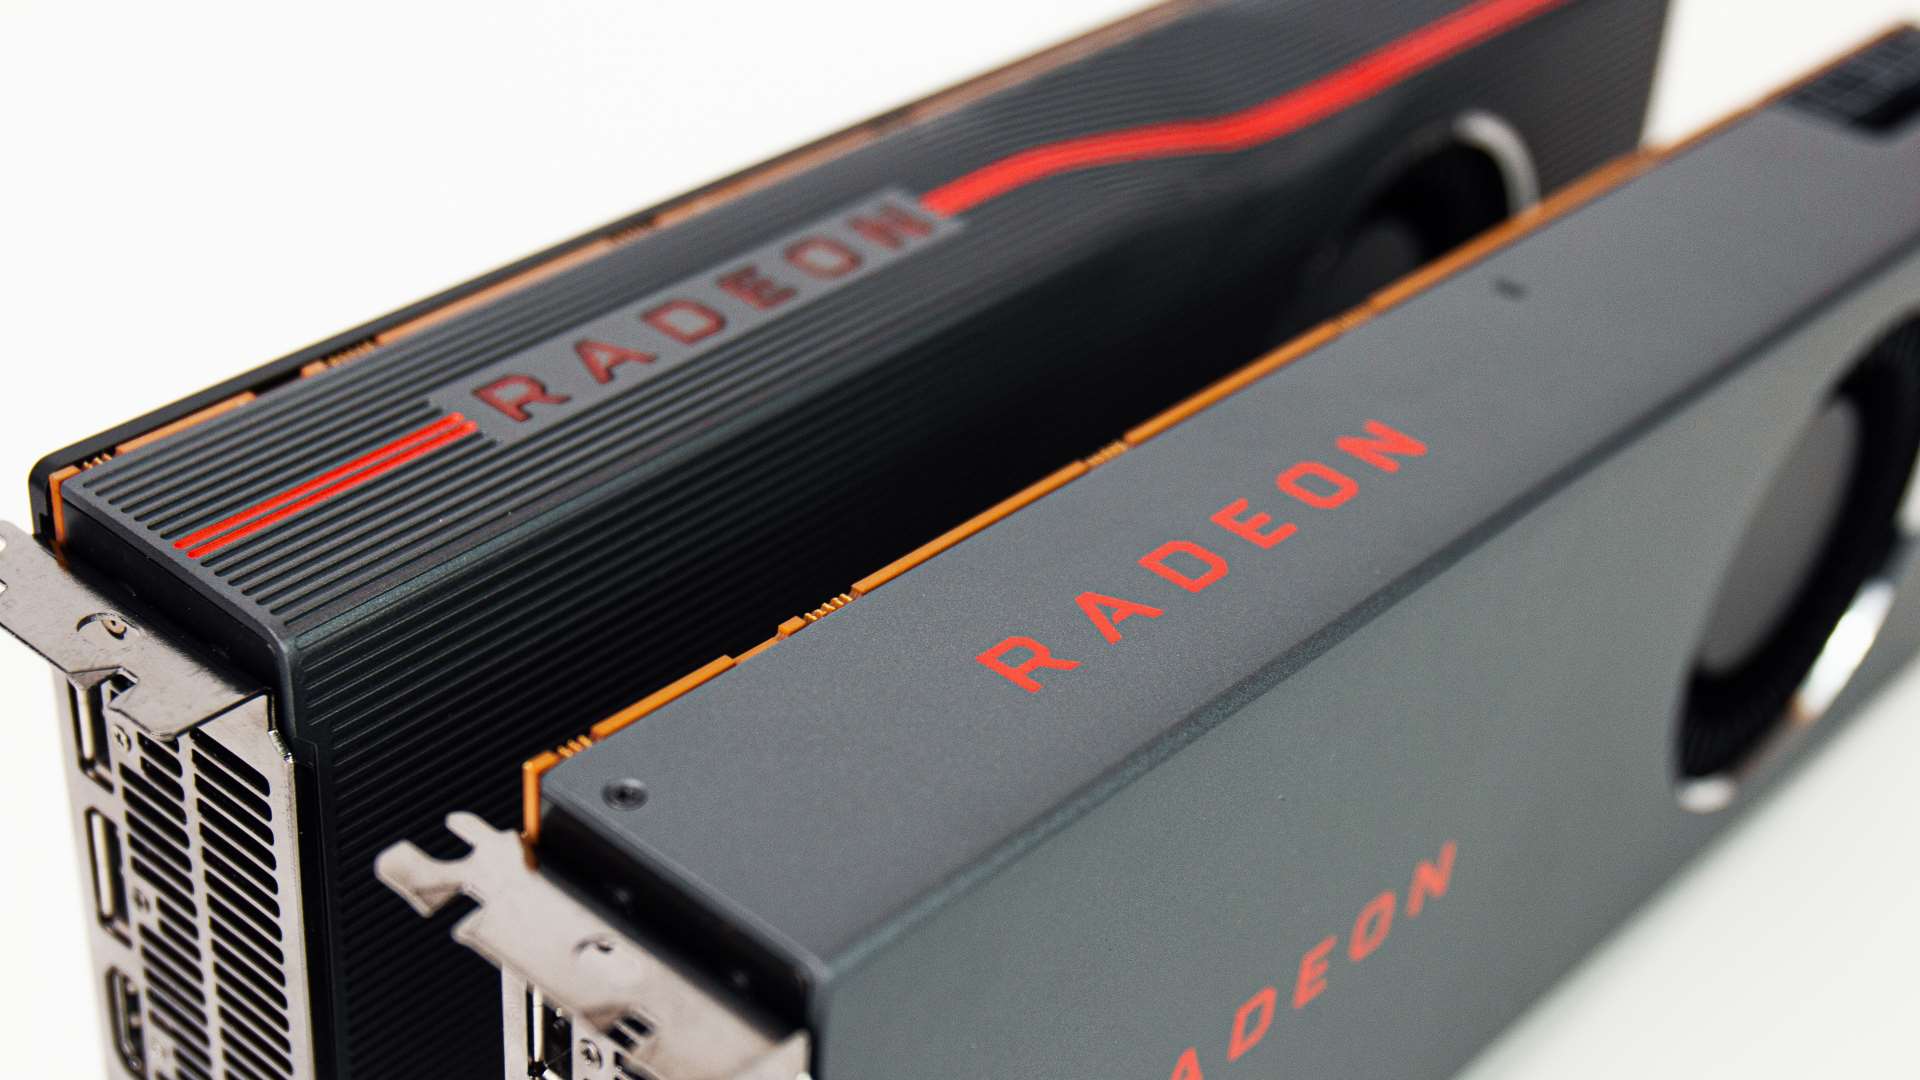 AMD drops driver support on older GPUs, including the 6-year-old 300 series